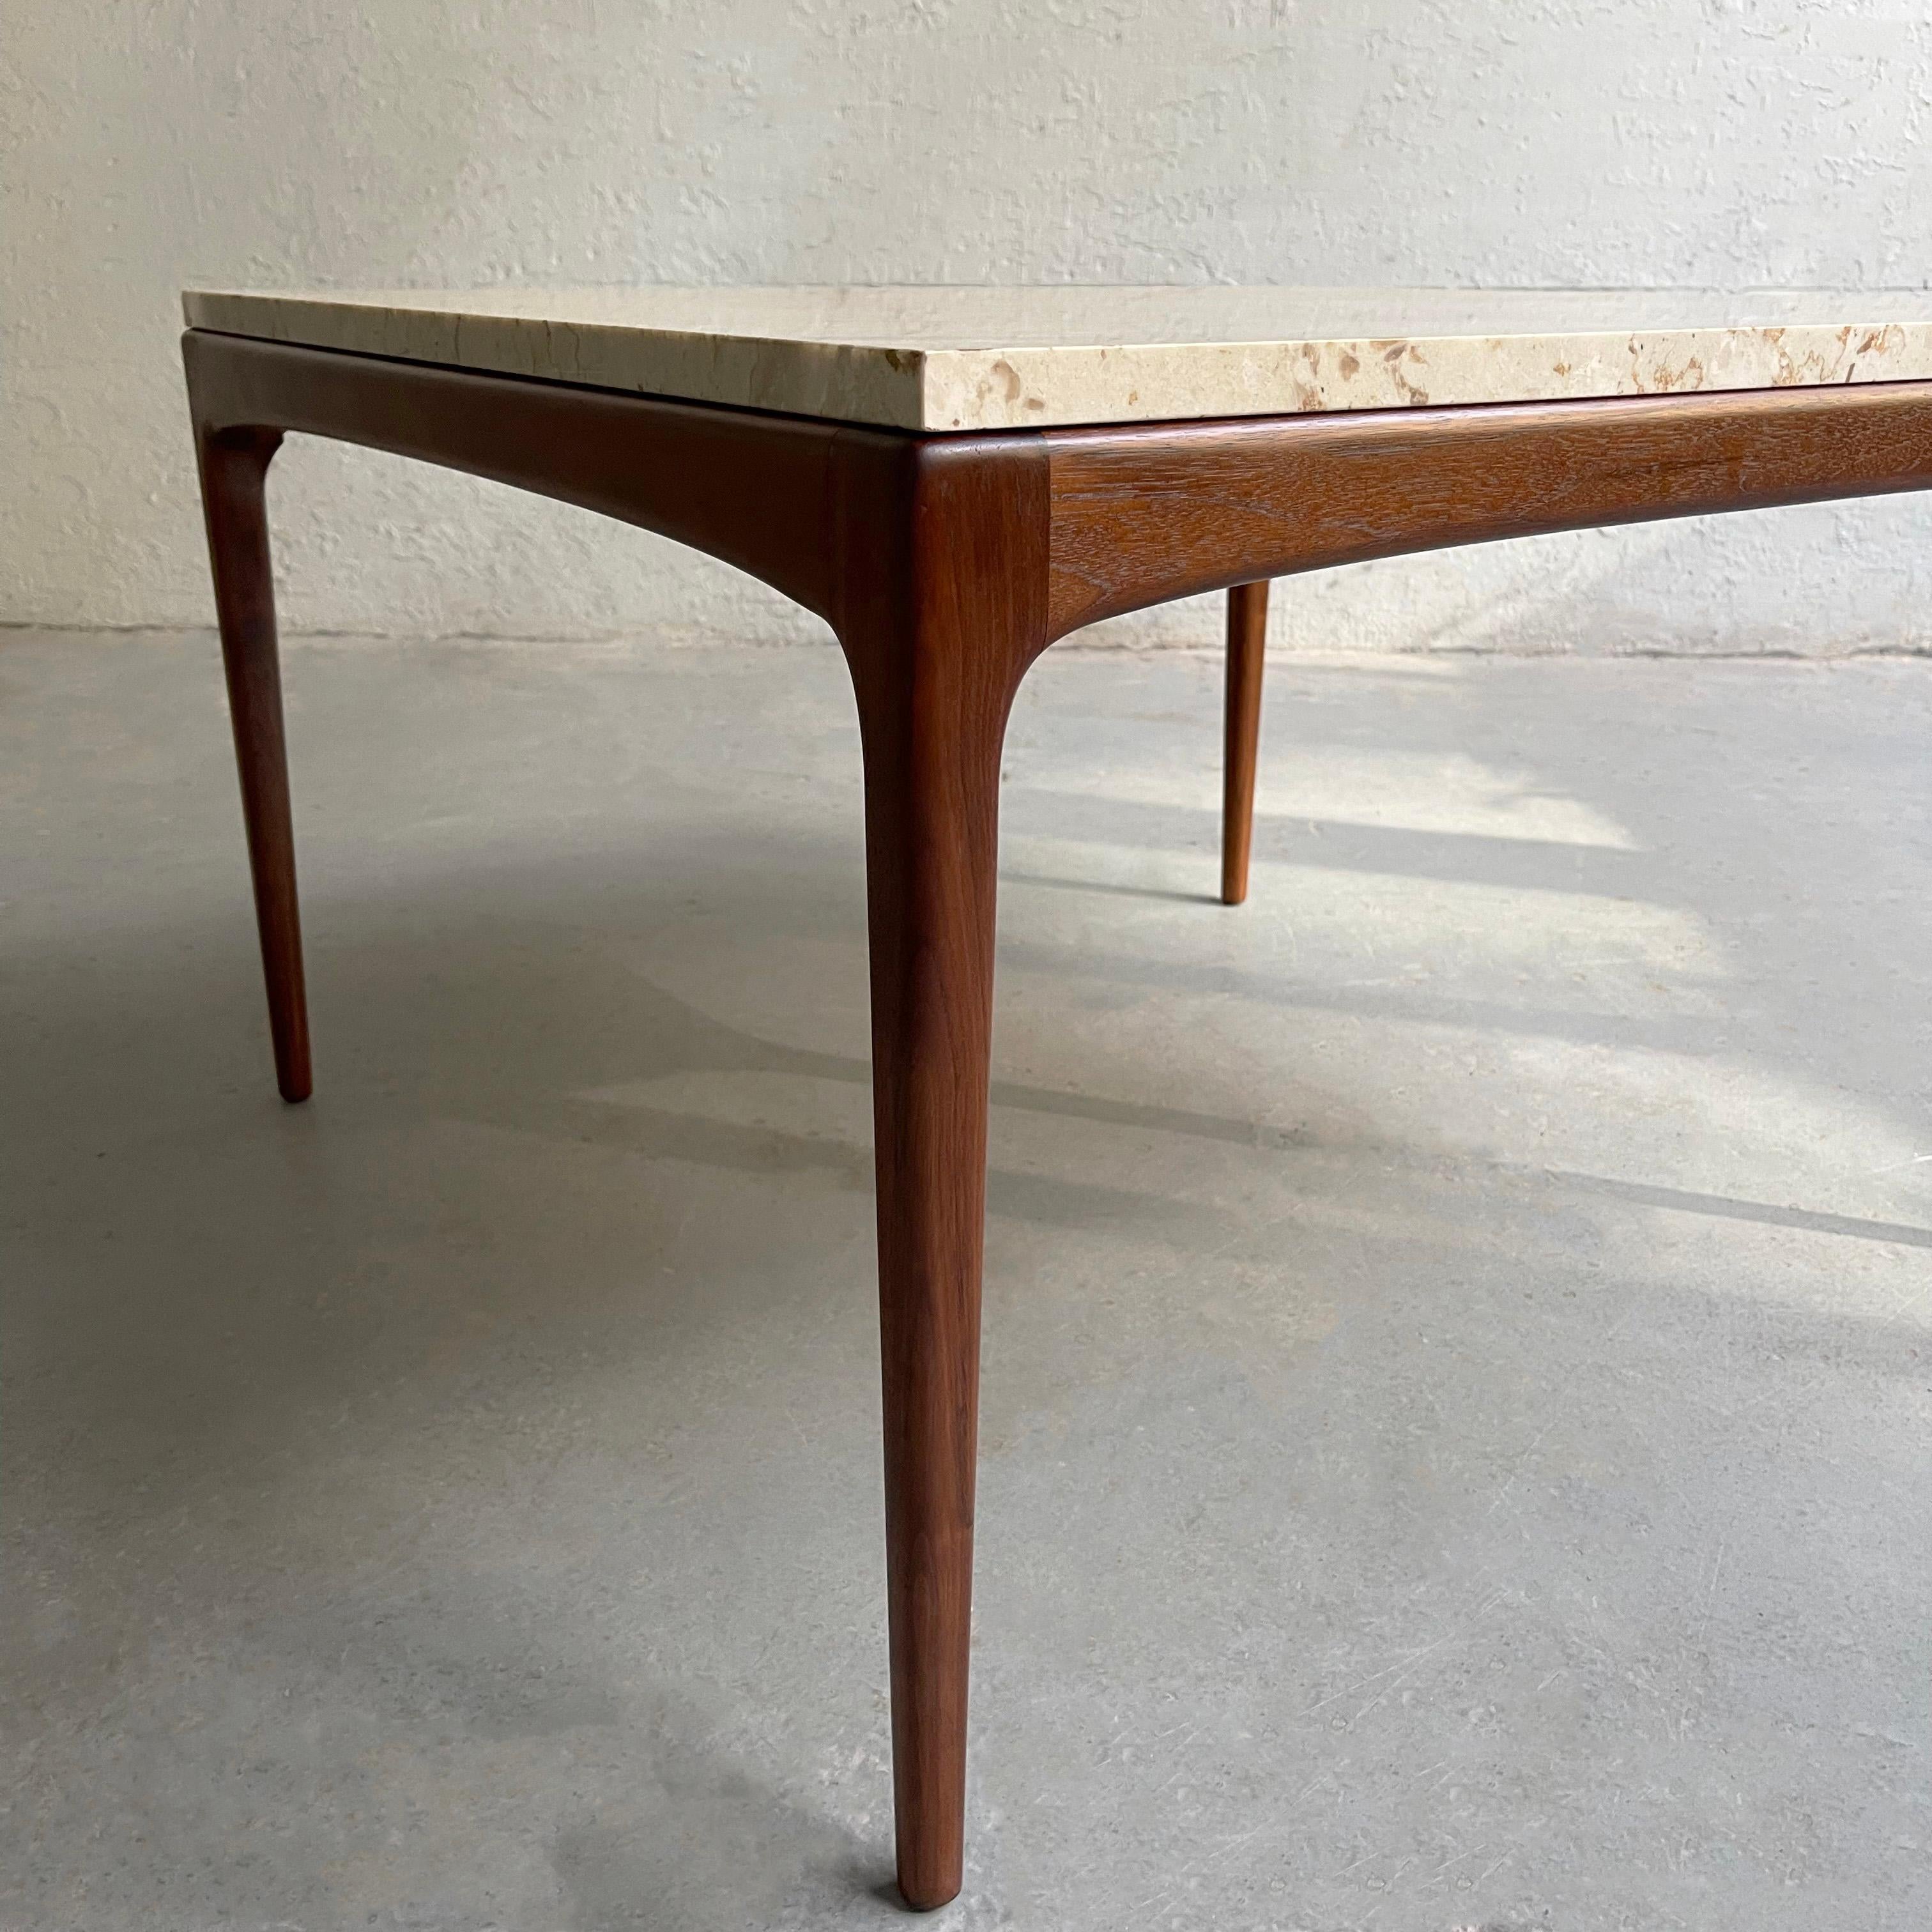 20th Century Scandinavian Modern Teak and Marble Coffee Table For Sale